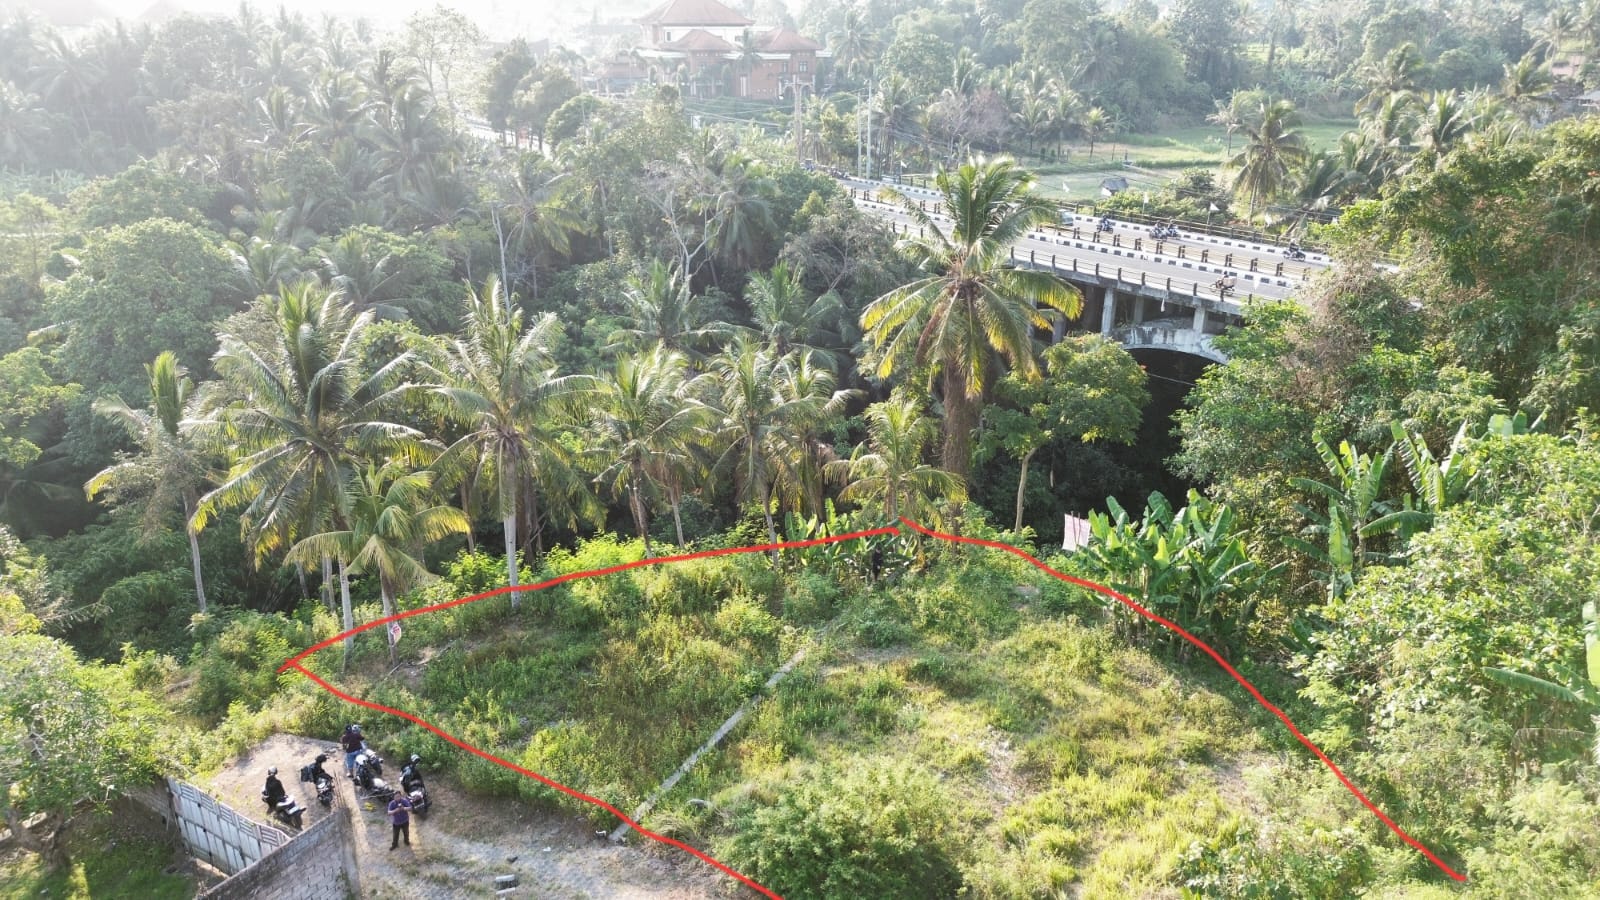 Riverside Land: 6.68 Are for Sale in Ubud